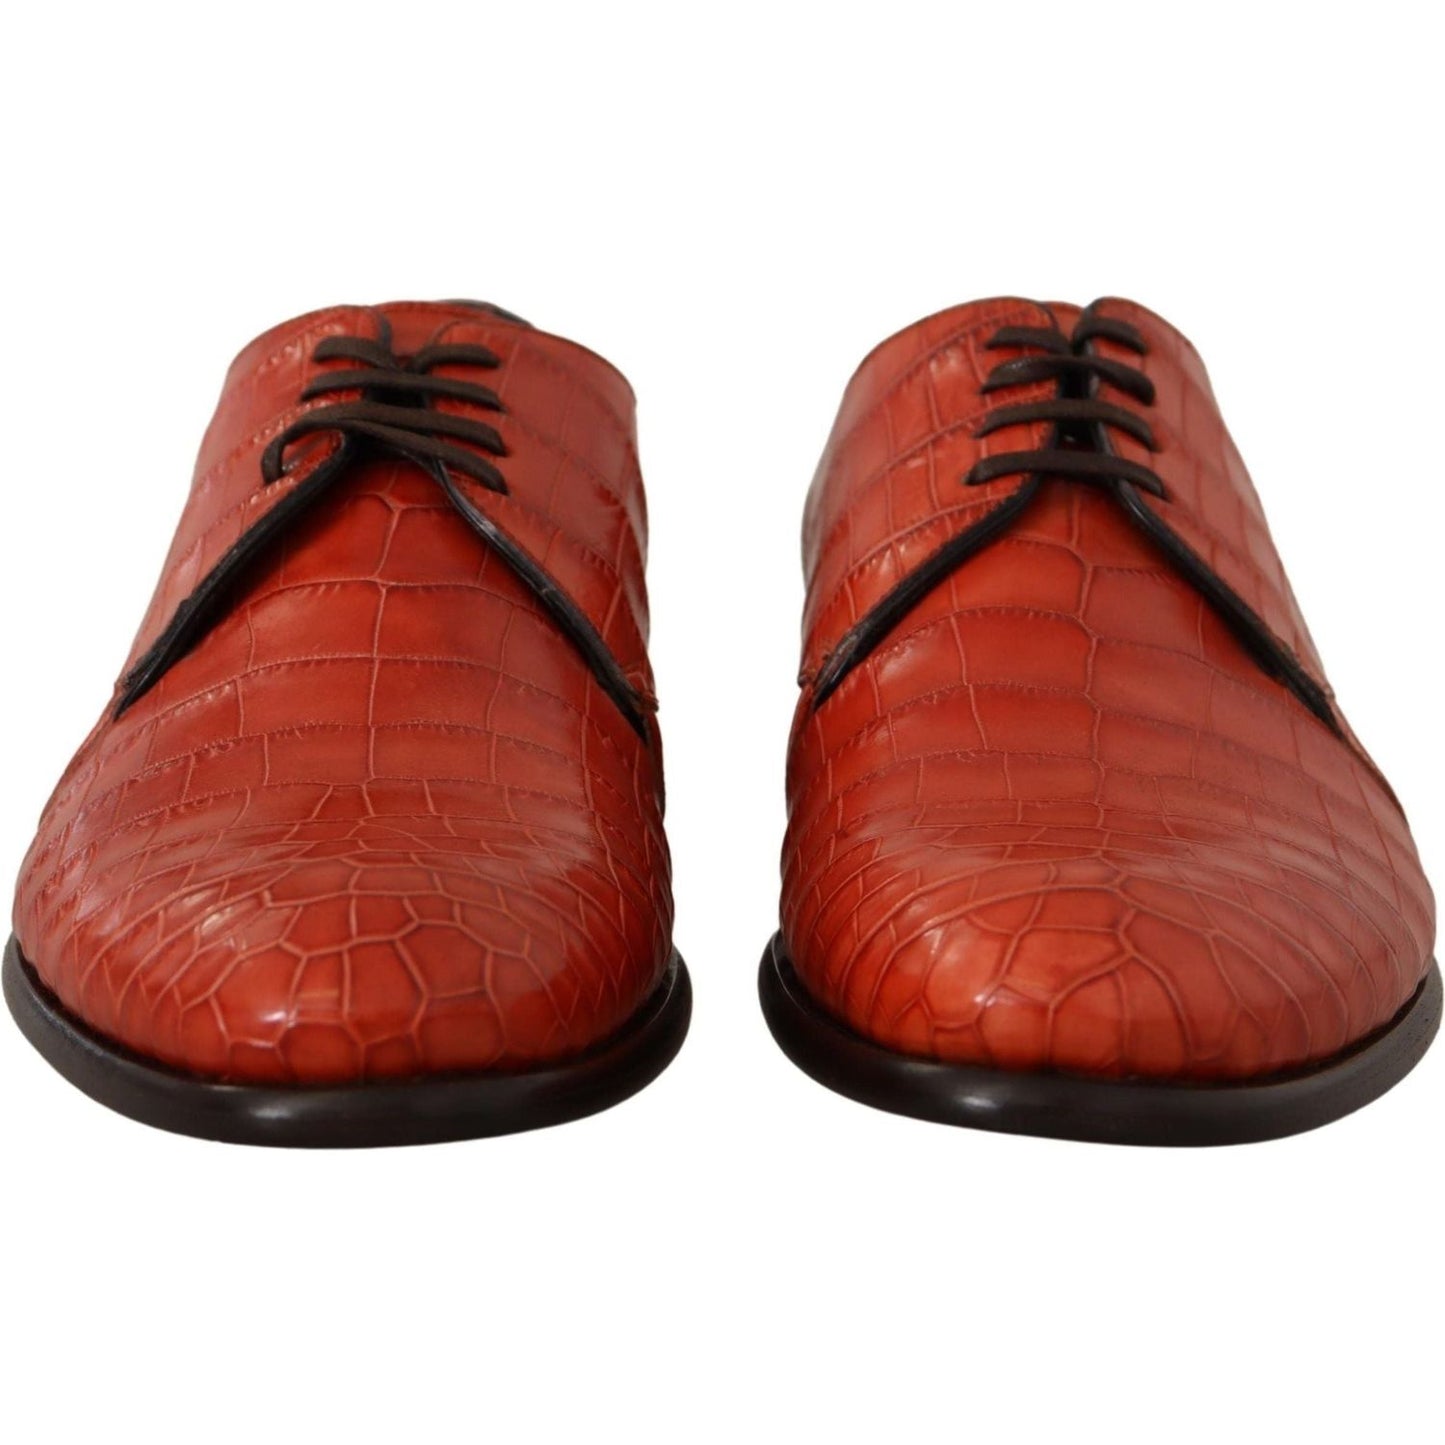 Dolce & Gabbana Exquisite Exotic Croc Leather Lace-Up Dress Shoes orange-exotic-leather-dress-derby-shoes IMG_2144-scaled-f6af3c71-615.jpg